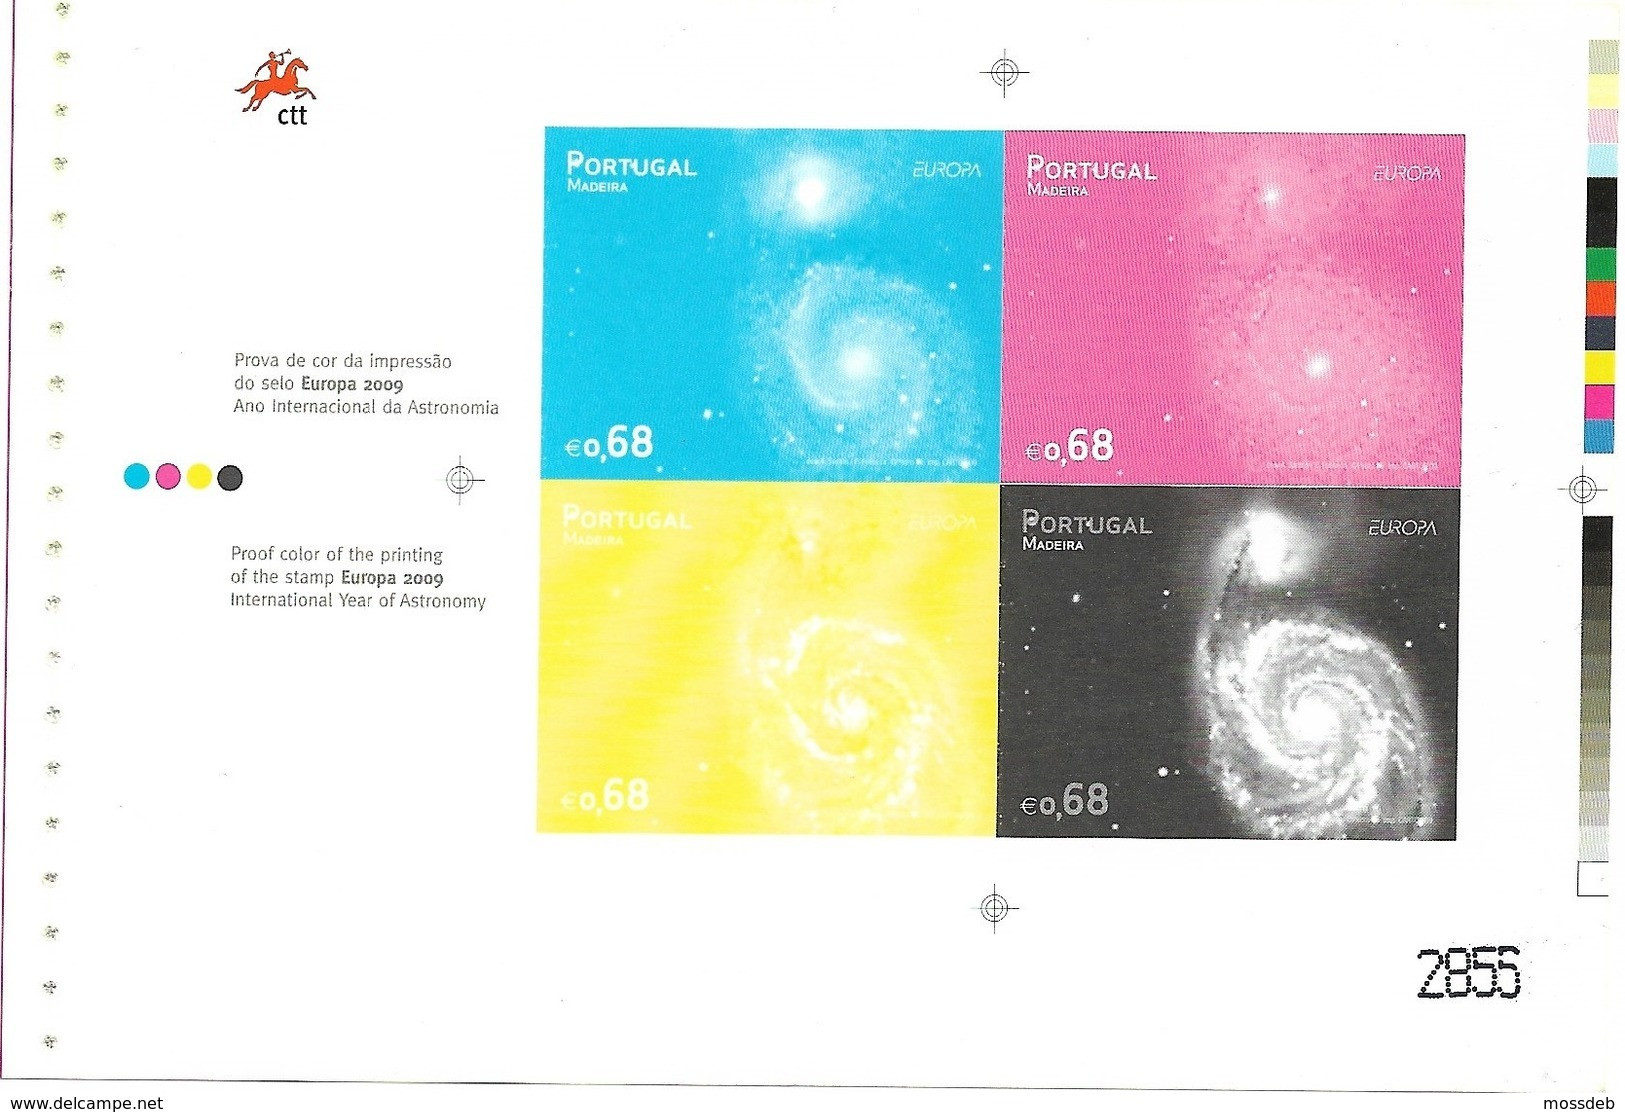 PORTUGAL 2009 IMAGE OF THE SPIRAL GALAXY M51  CONSTELATION Canes Venatici - PROGRESSIVE PROOF - Proofs & Reprints